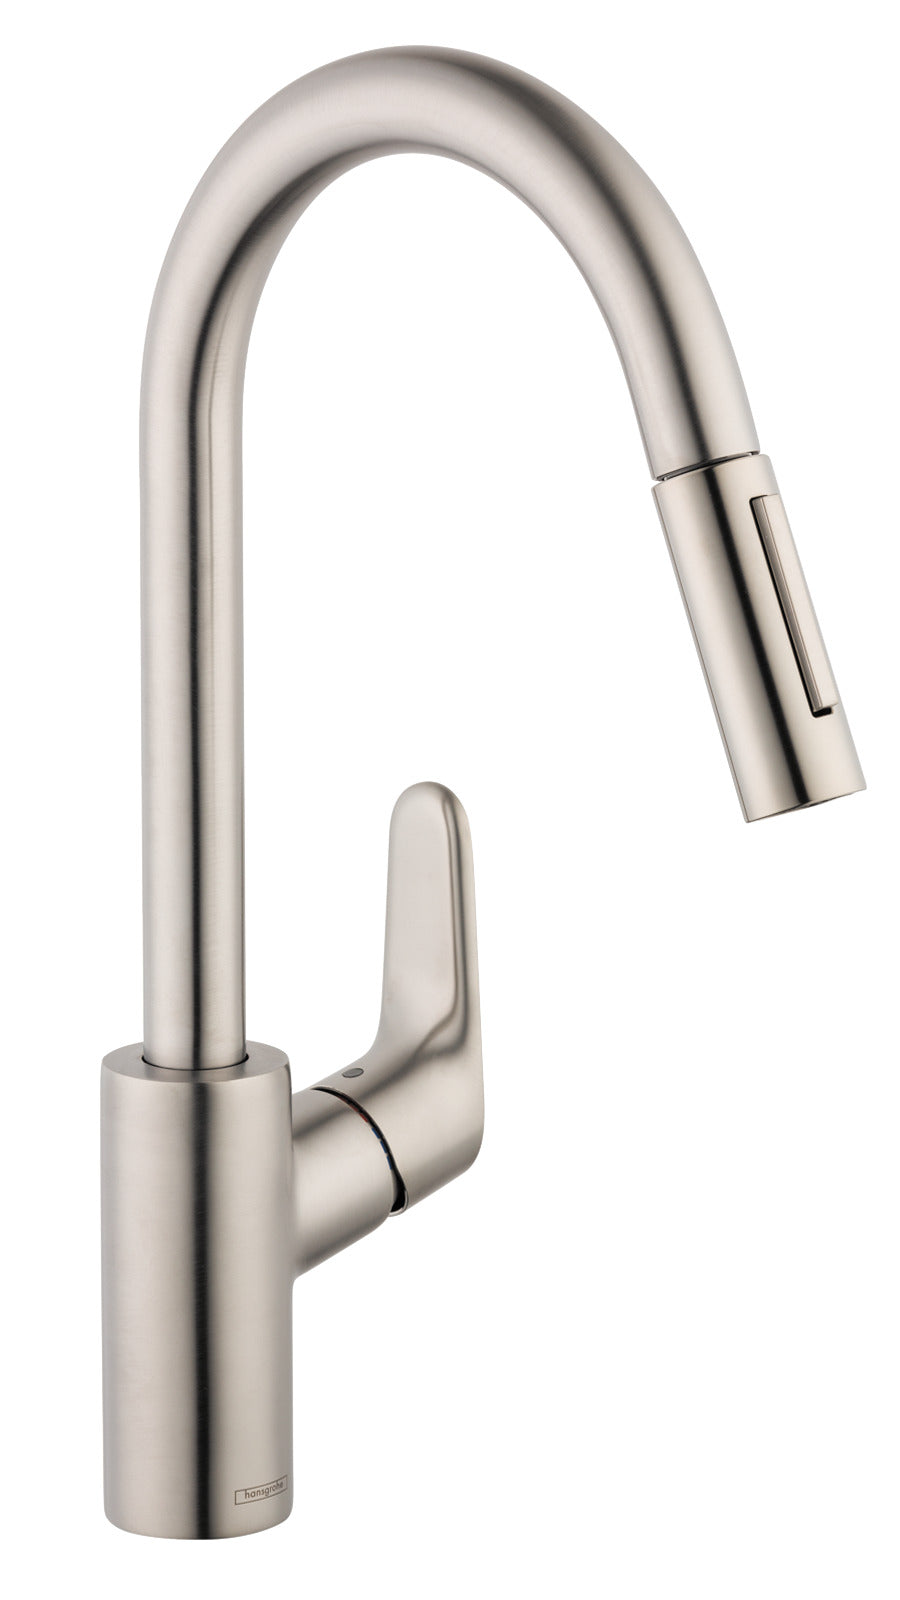 HANSGROHE 04920800 Stainless Steel Optic Focus Modern Kitchen Faucet 1.5 GPM